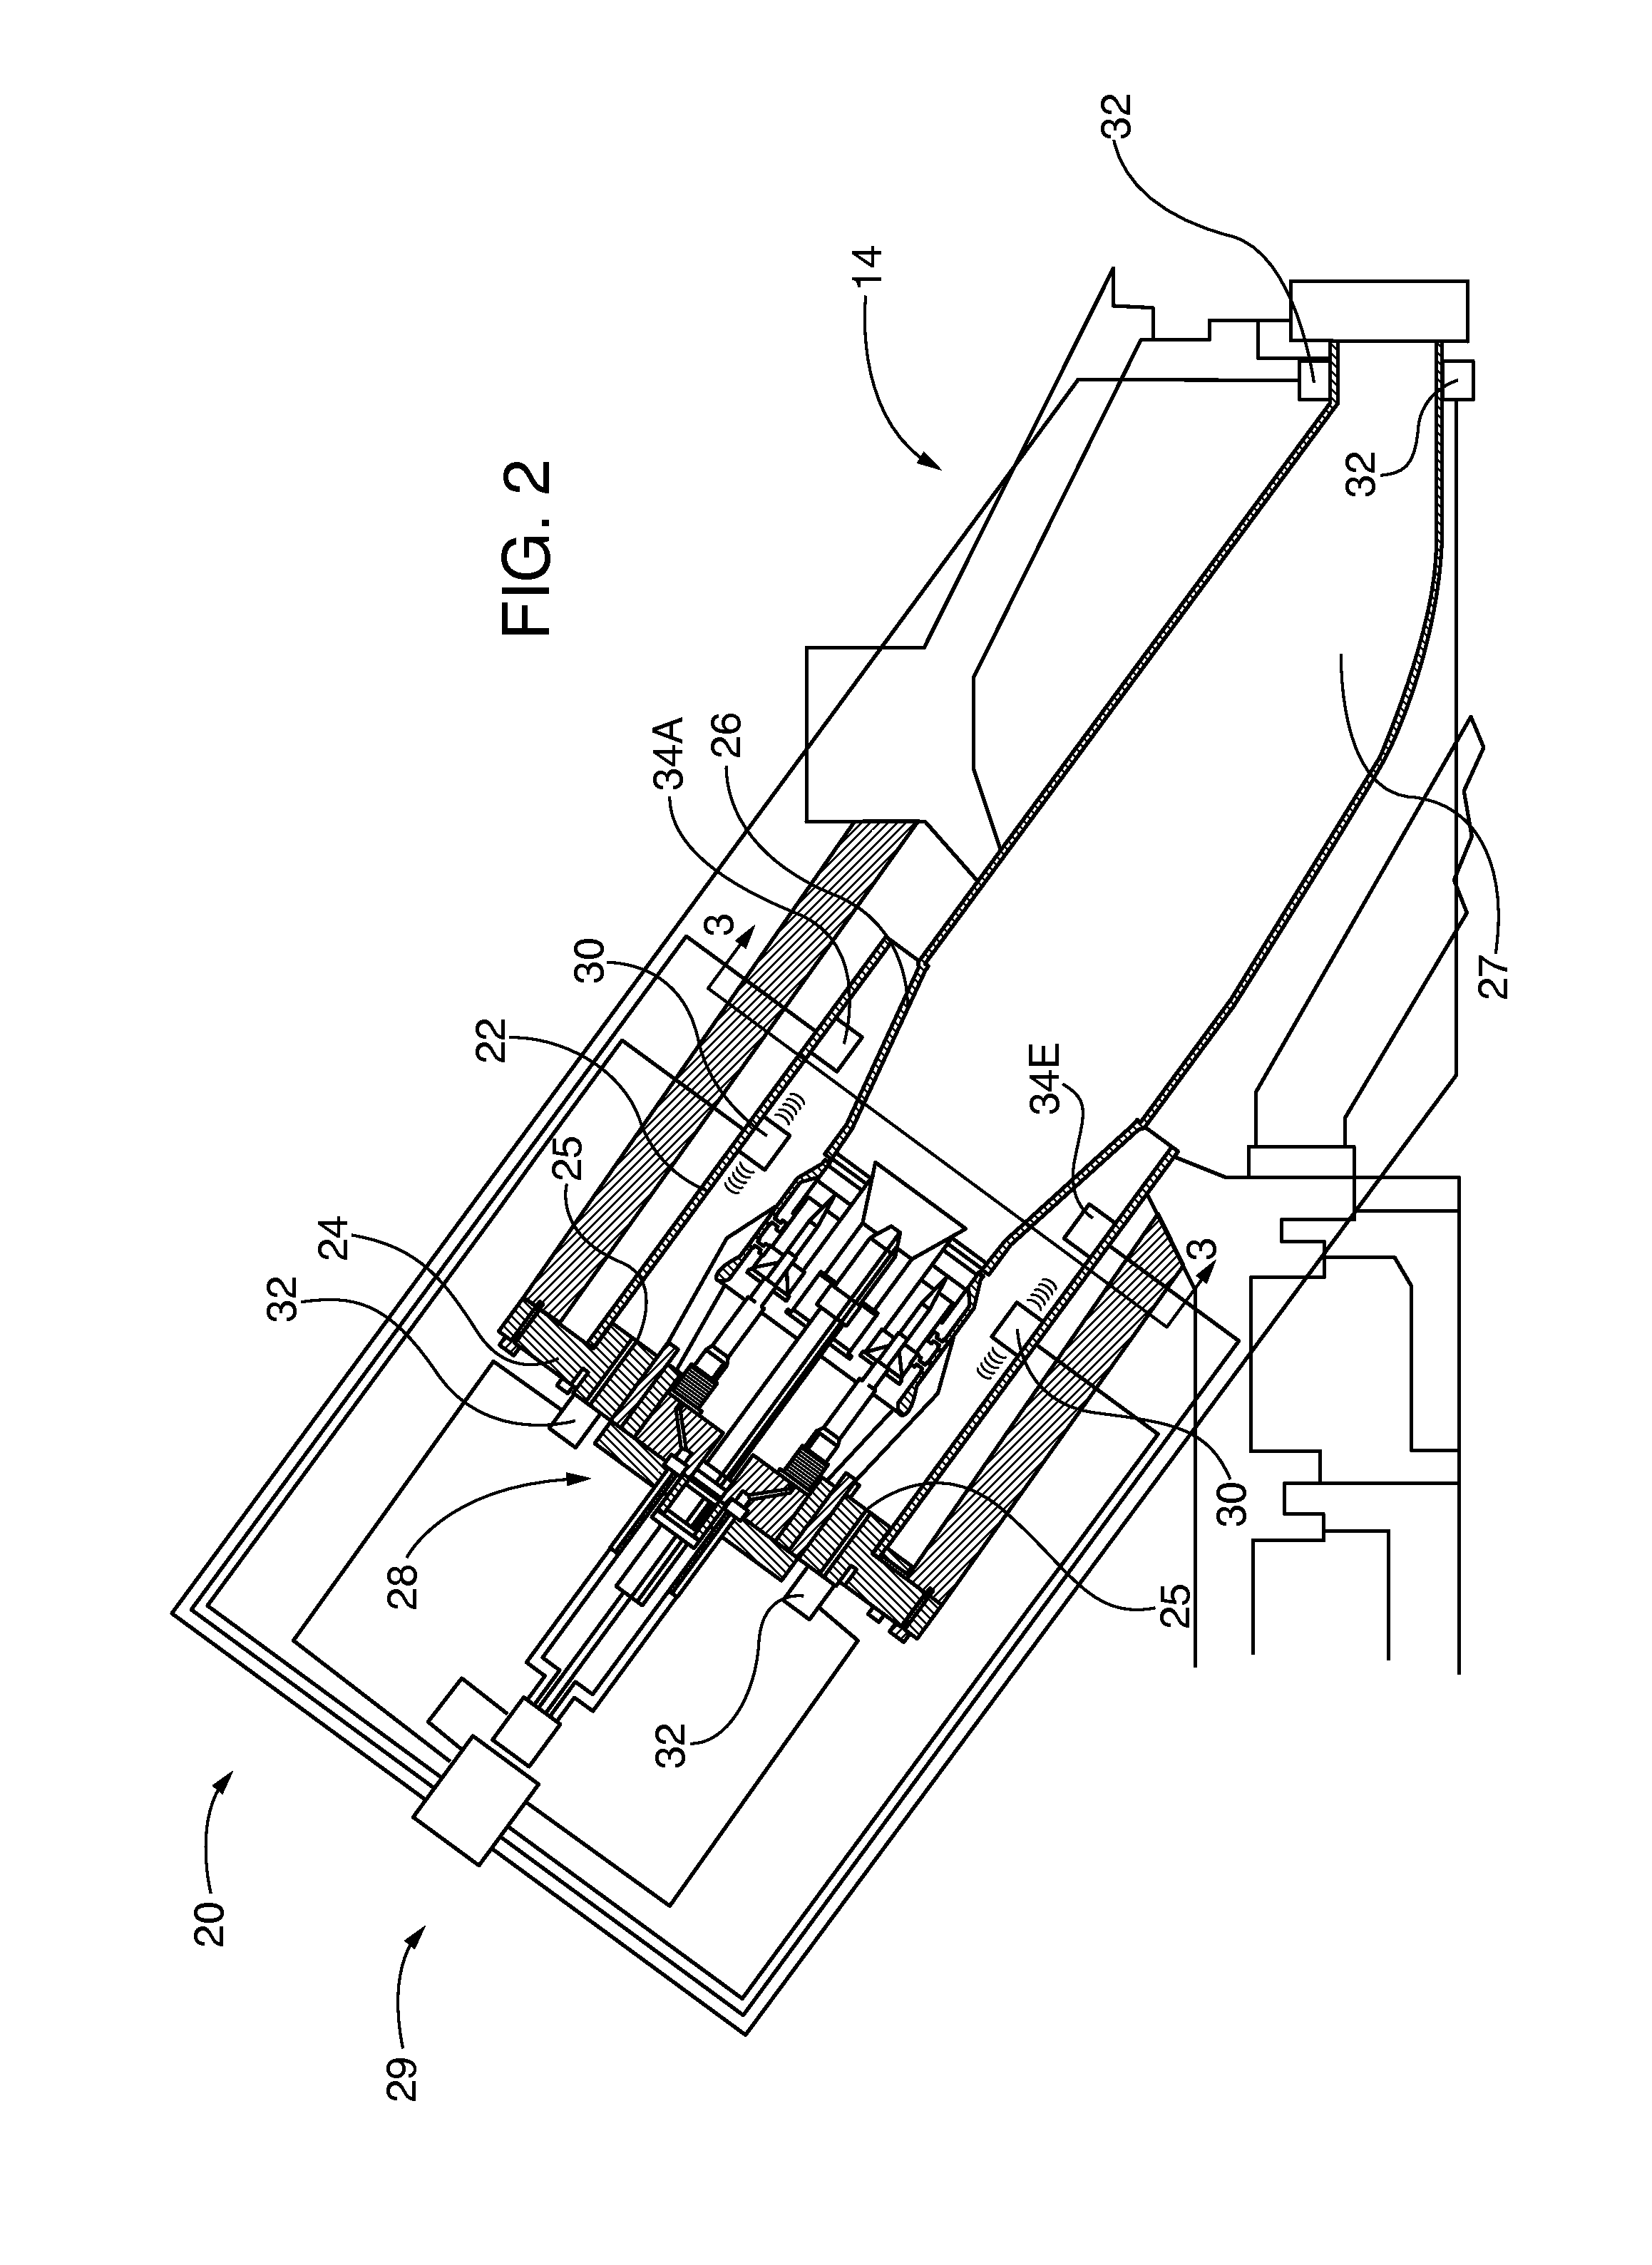 Multi functional sensor system for gas turbine combustion monitoring and control